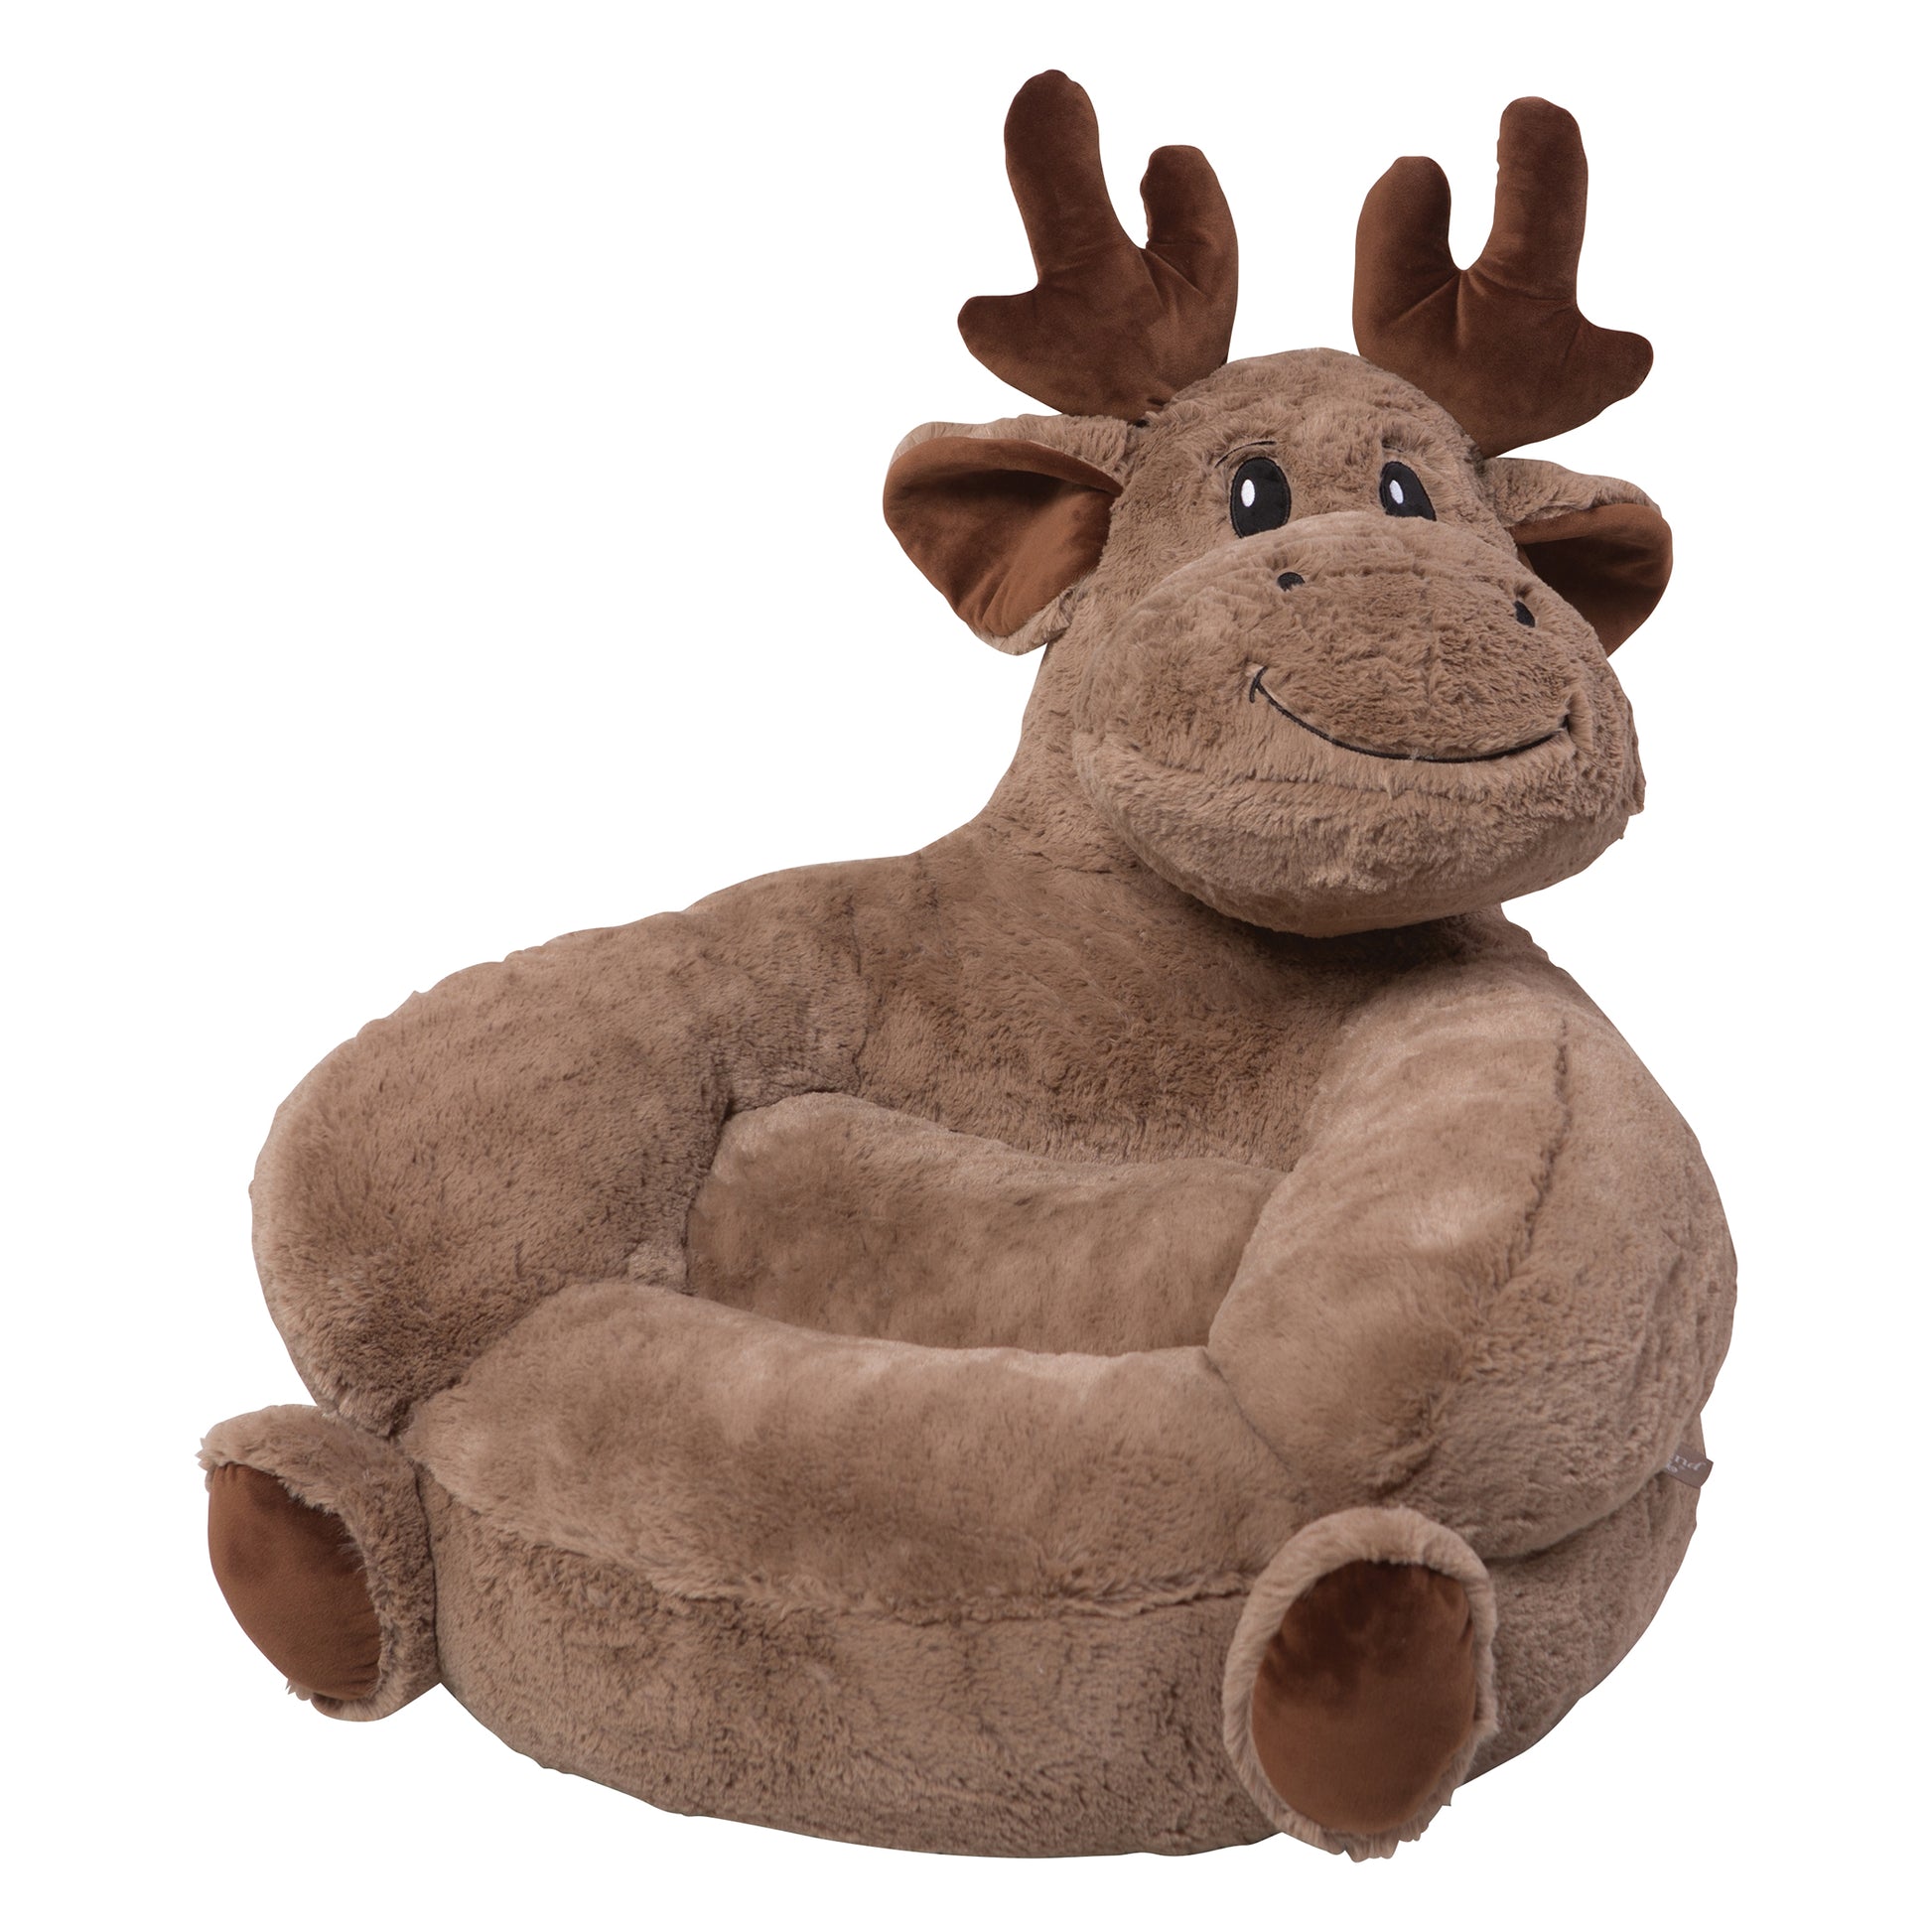 Children's Plush Moose Character Chair102650$69.99Trend Lab